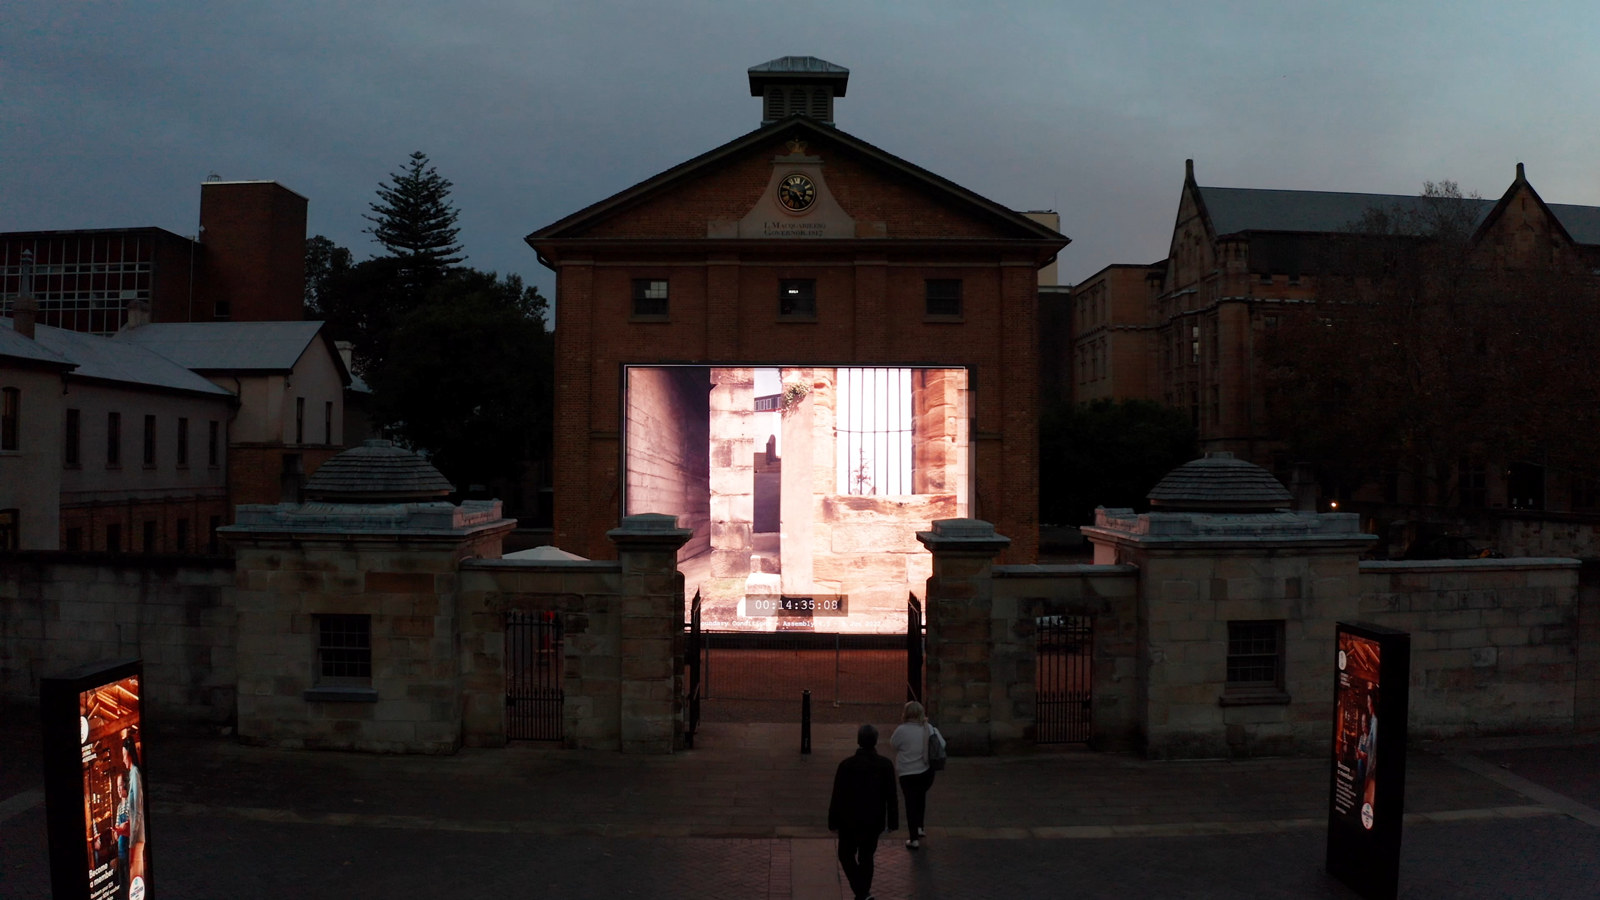 Boundary Conditions in the courtyard of Hyde Park Barracks by Daniel Crooks